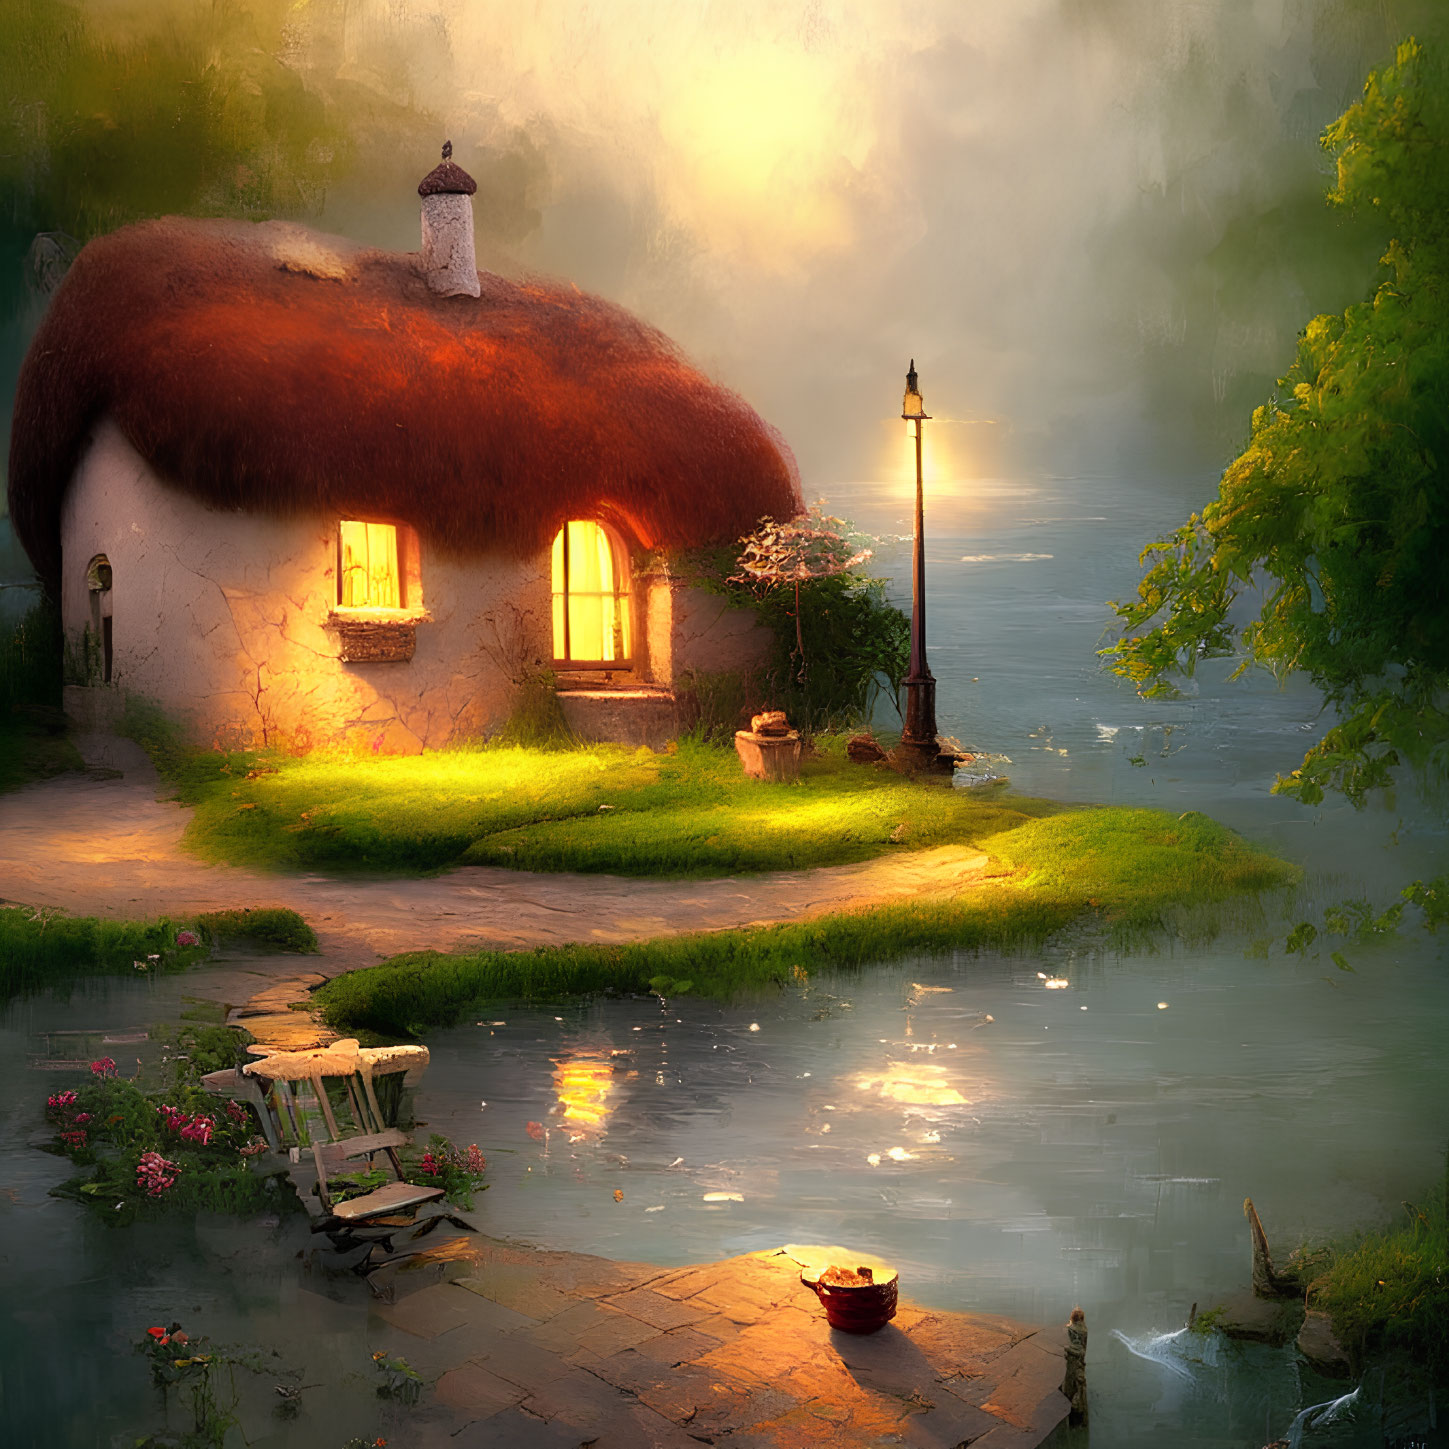 Quaint Thatched-Roof Cottage by Serene River at Dusk